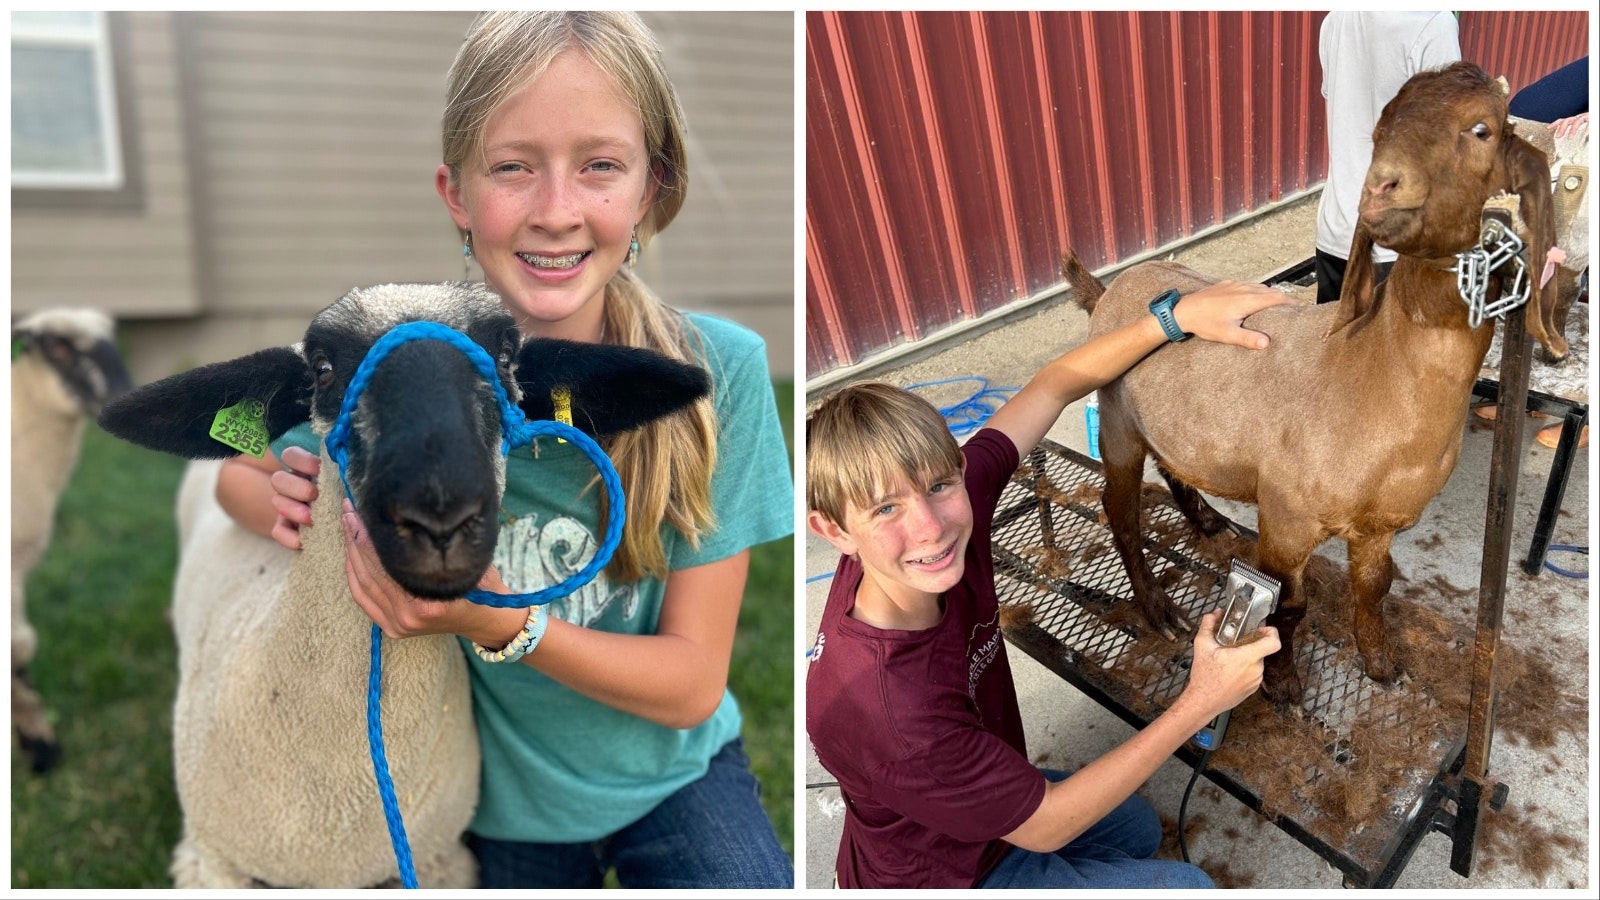 Isabelle Cox, left, with her lamb. At right, Jack Edmiston grooms Chocolate.